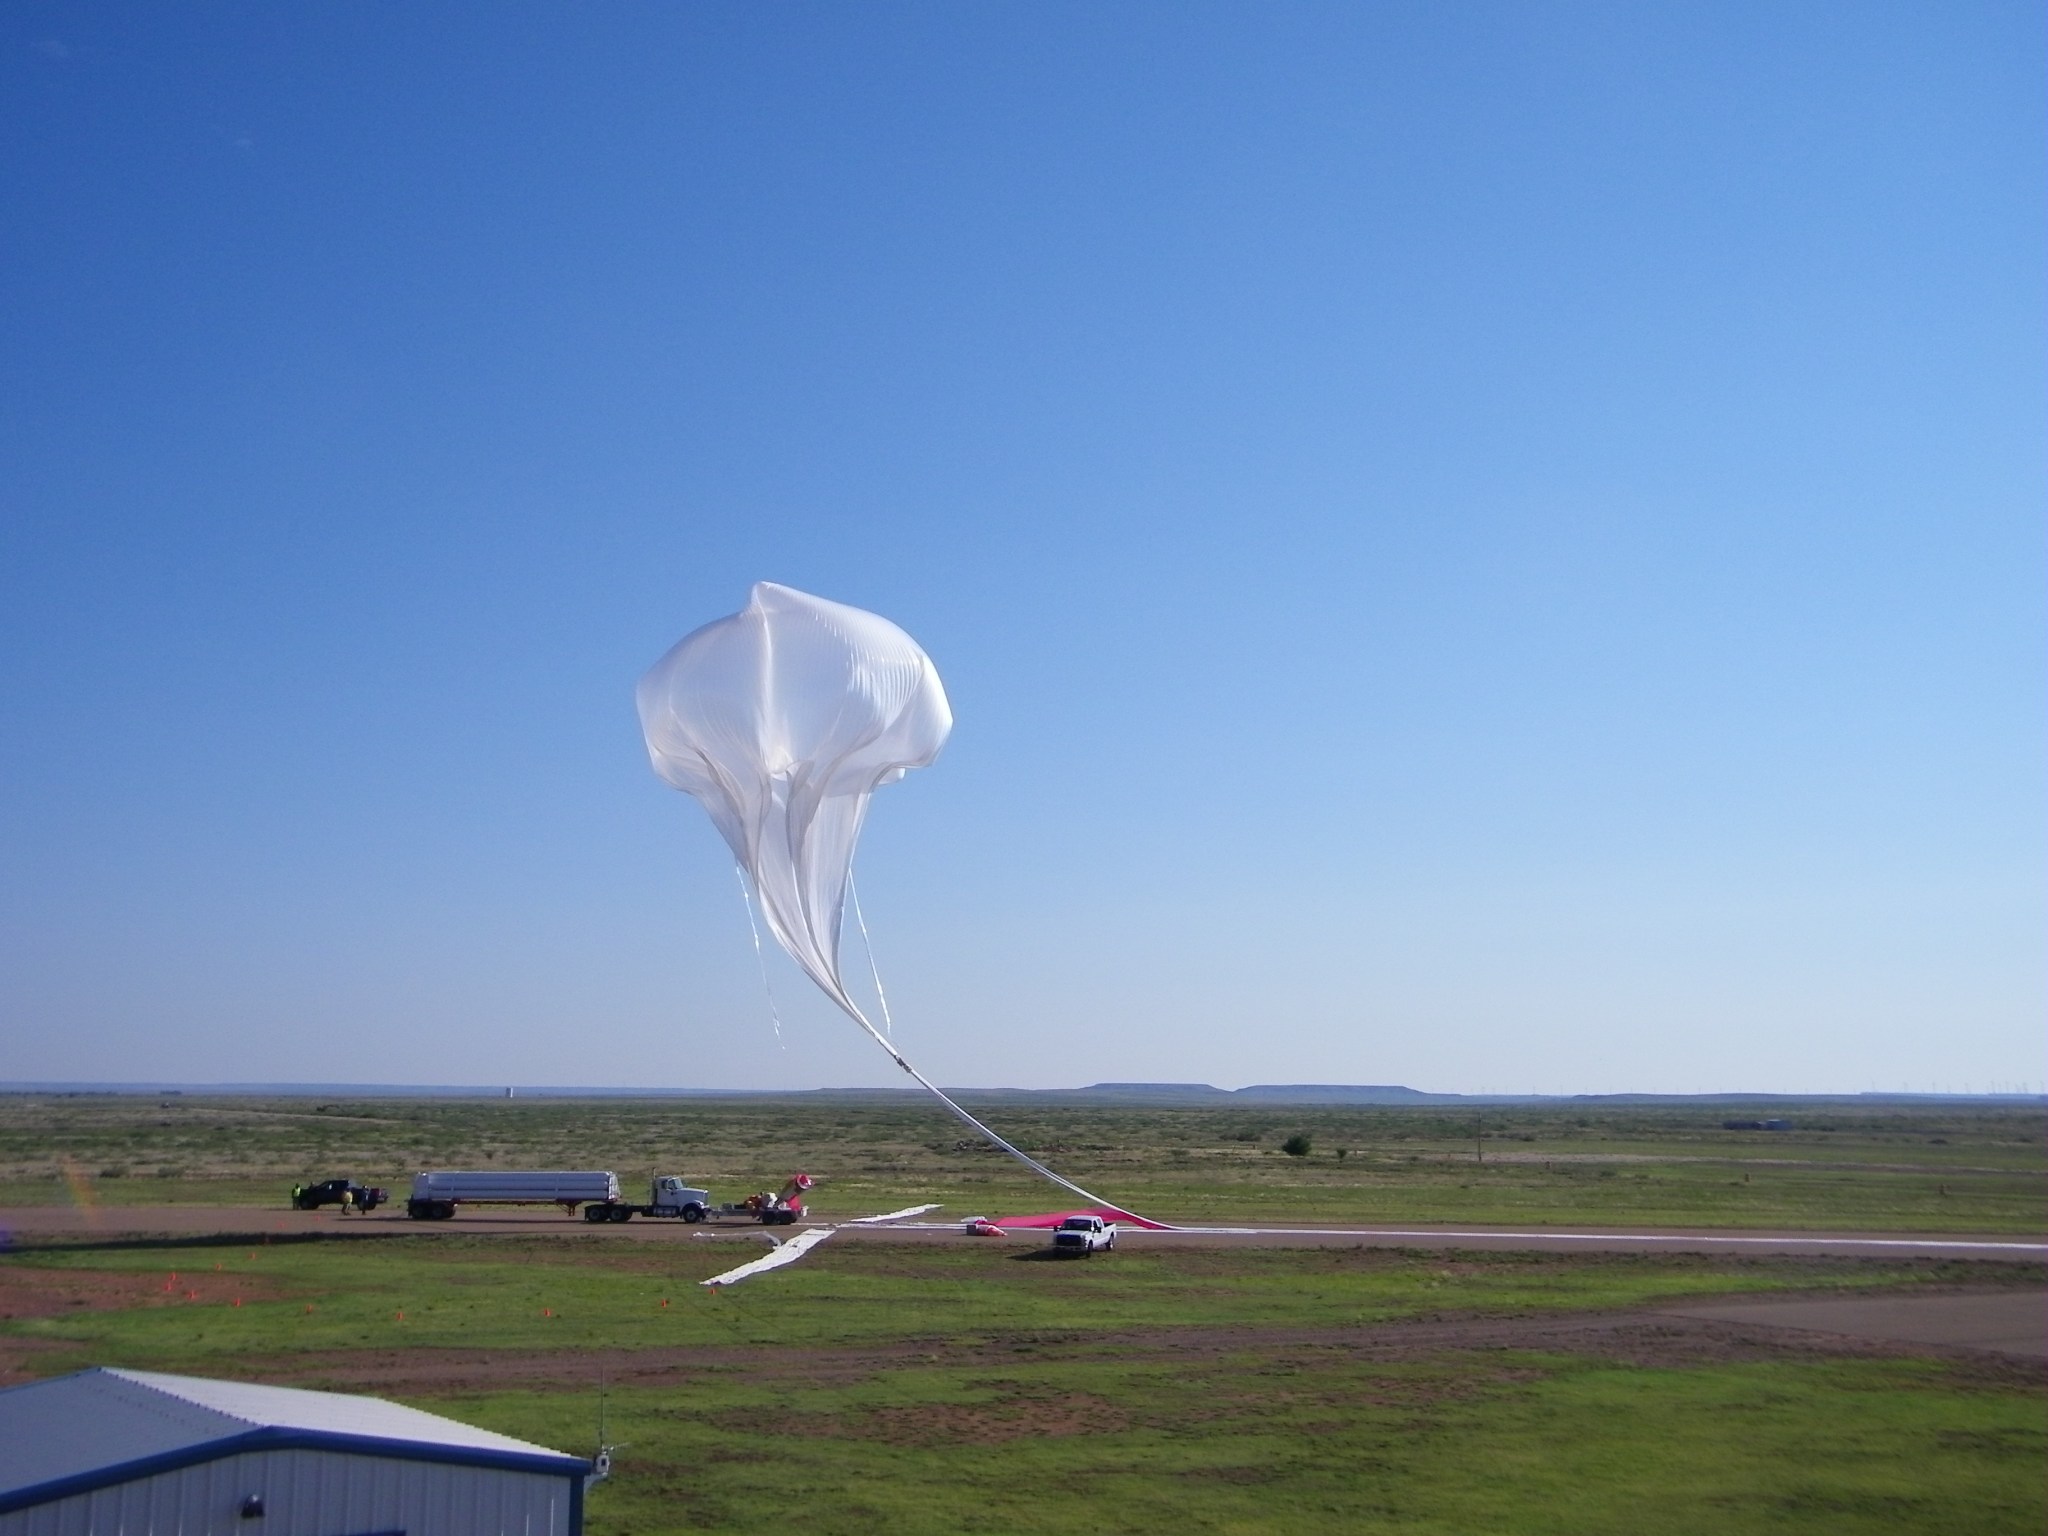 A scientific balloon partially inflated preparing to launch against a blue sky.